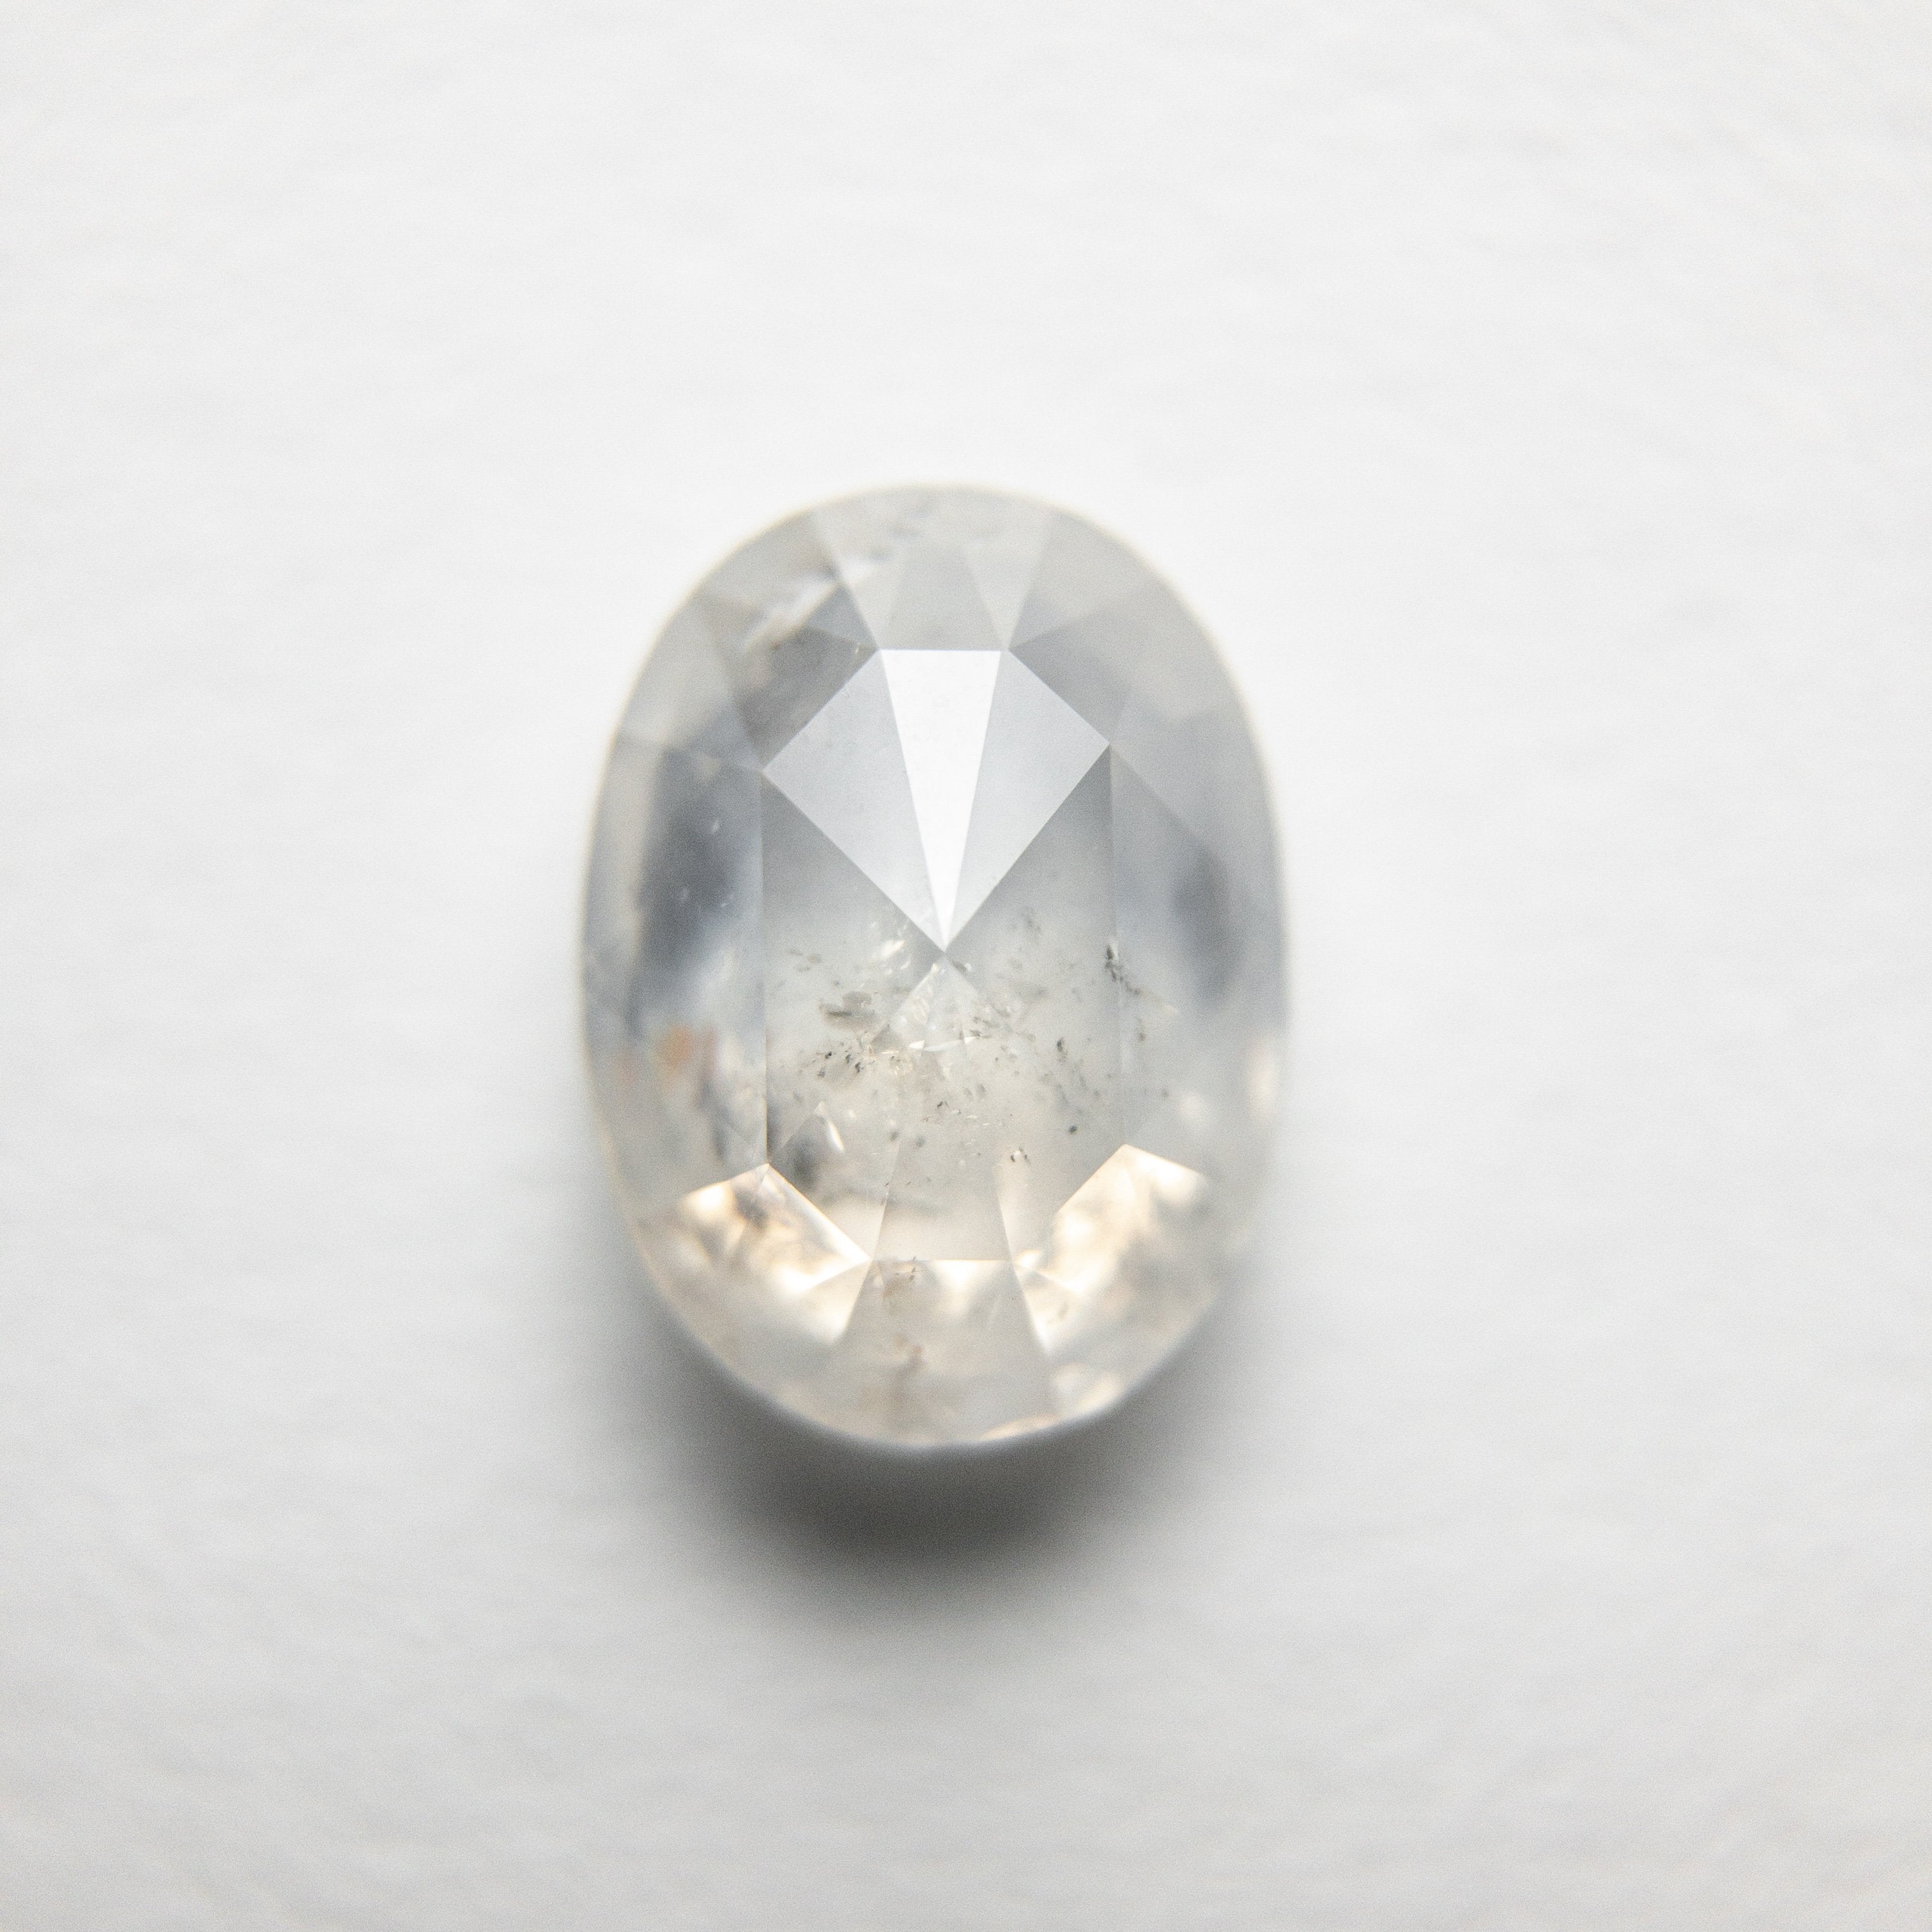 1.68ct 8.42x6.34x3.73mm Oval Double Cut 18386-22 HOLD D1437 11/18/20